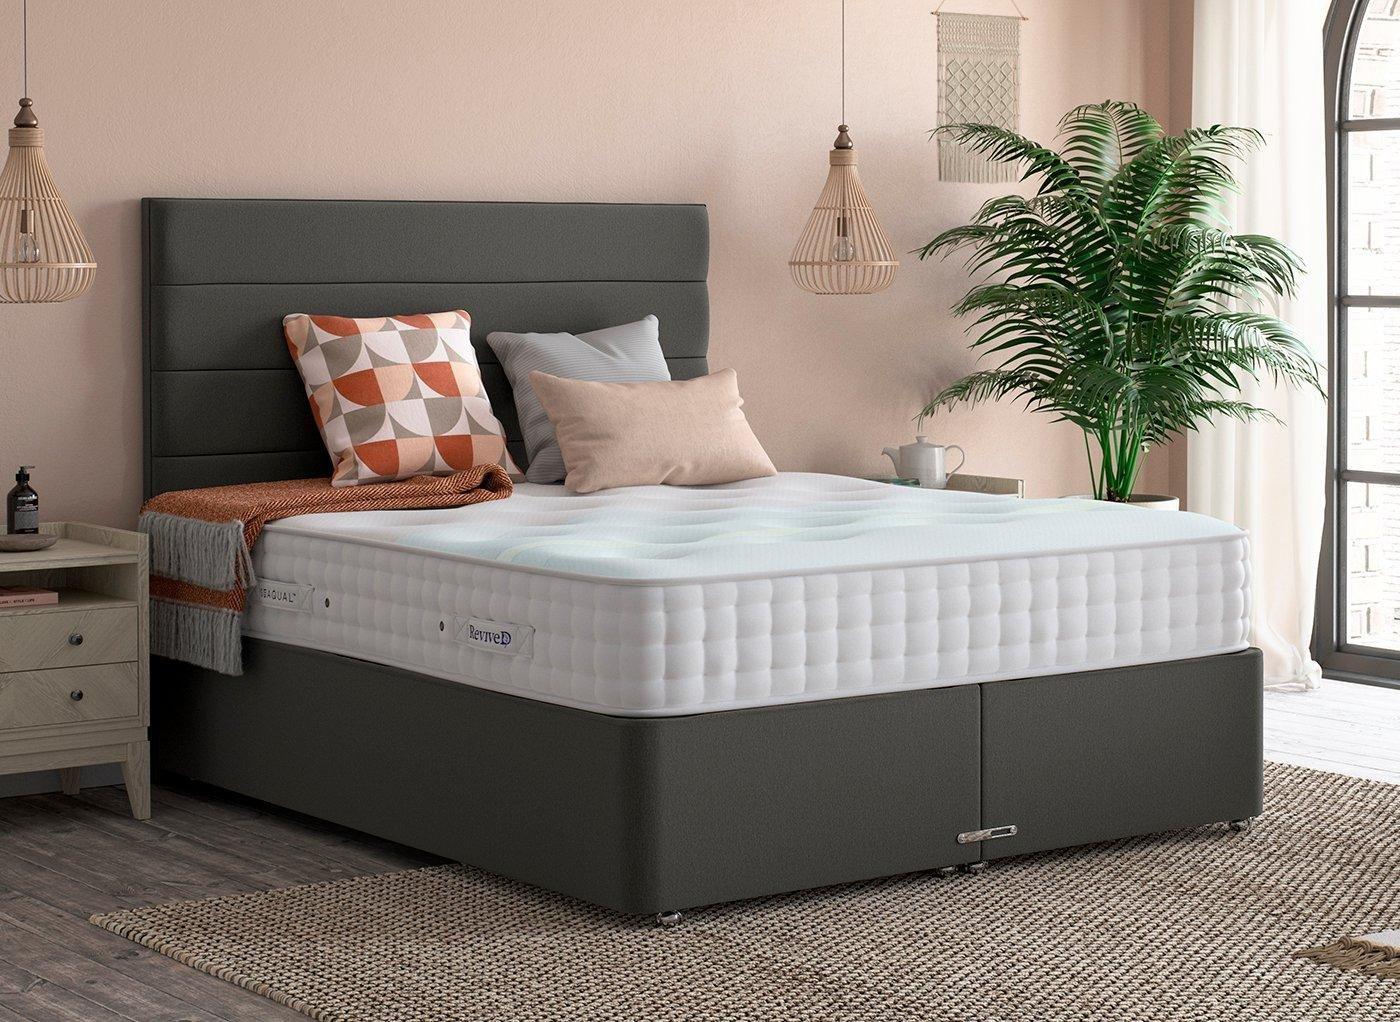 Dreams divan beds with drawers